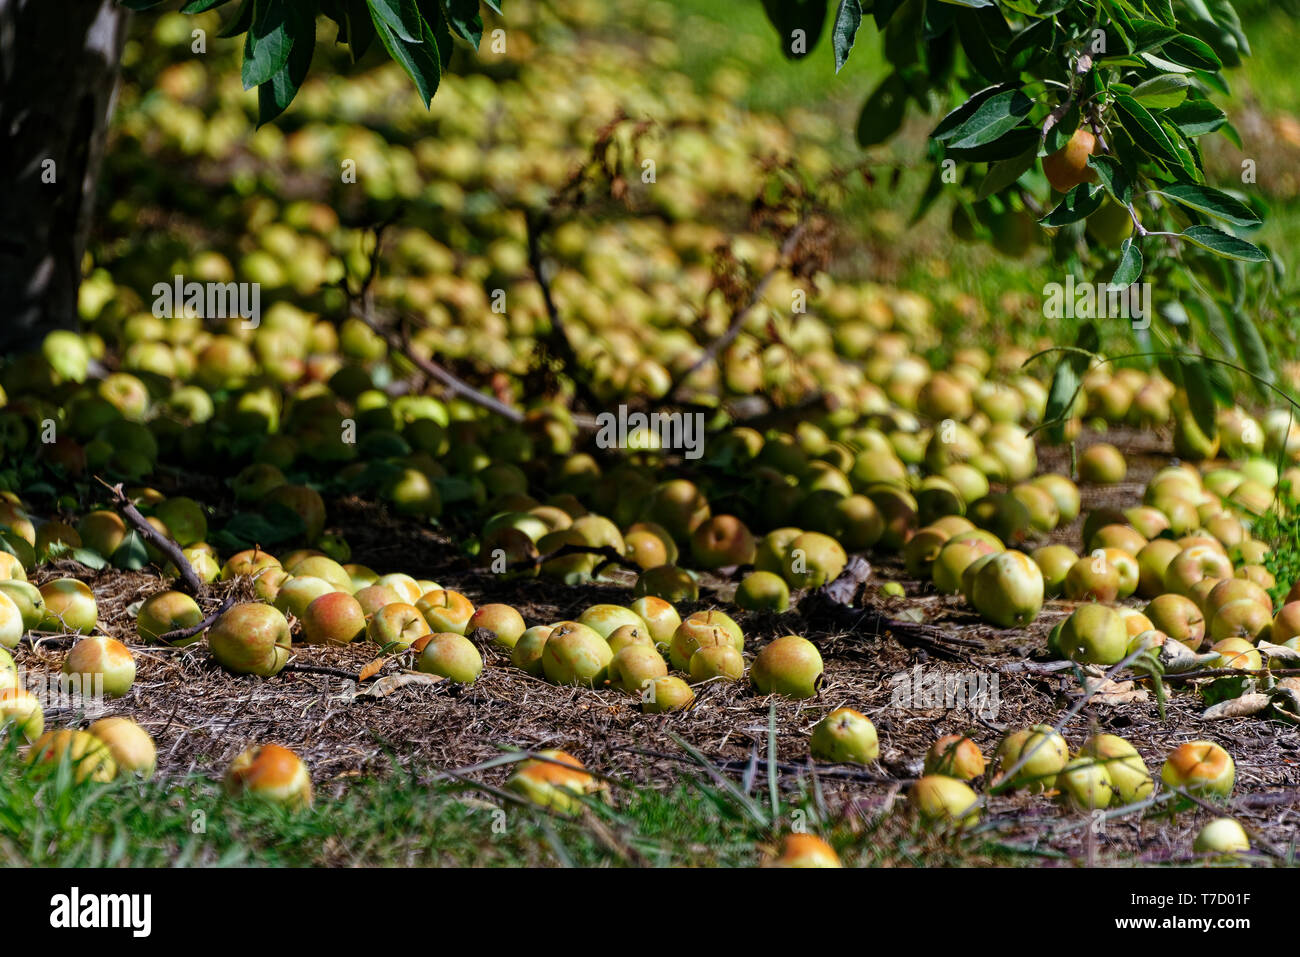 Food waste, lots of apples lie on the ground in an orchard Stock Photo